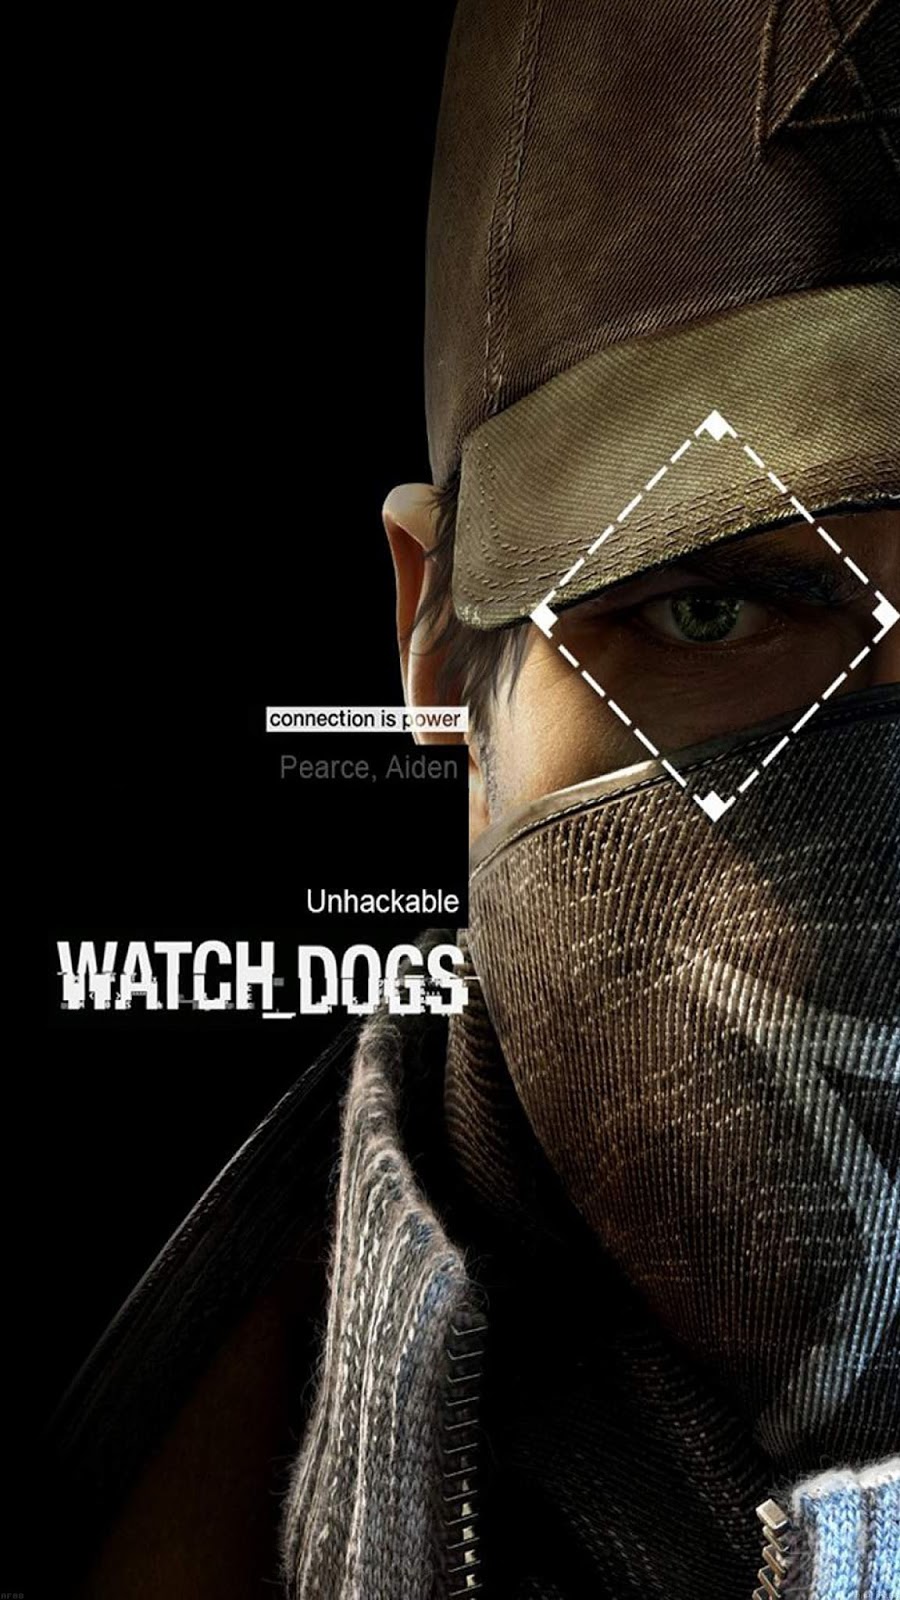 watchdogs-pearce-aiden-connection-is-power-iphone6-plus-wallpaper.jpg